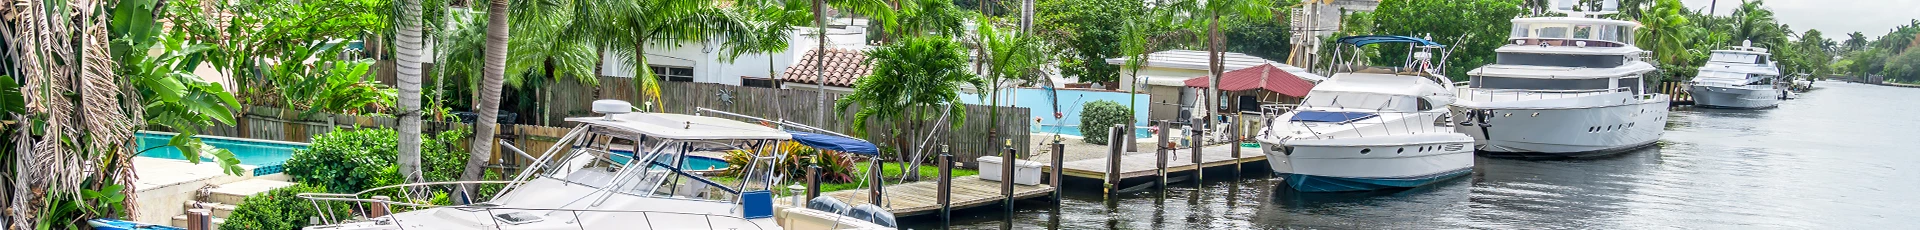 Boat Removal, Dismantle and Disposal in Carrollwood Florida